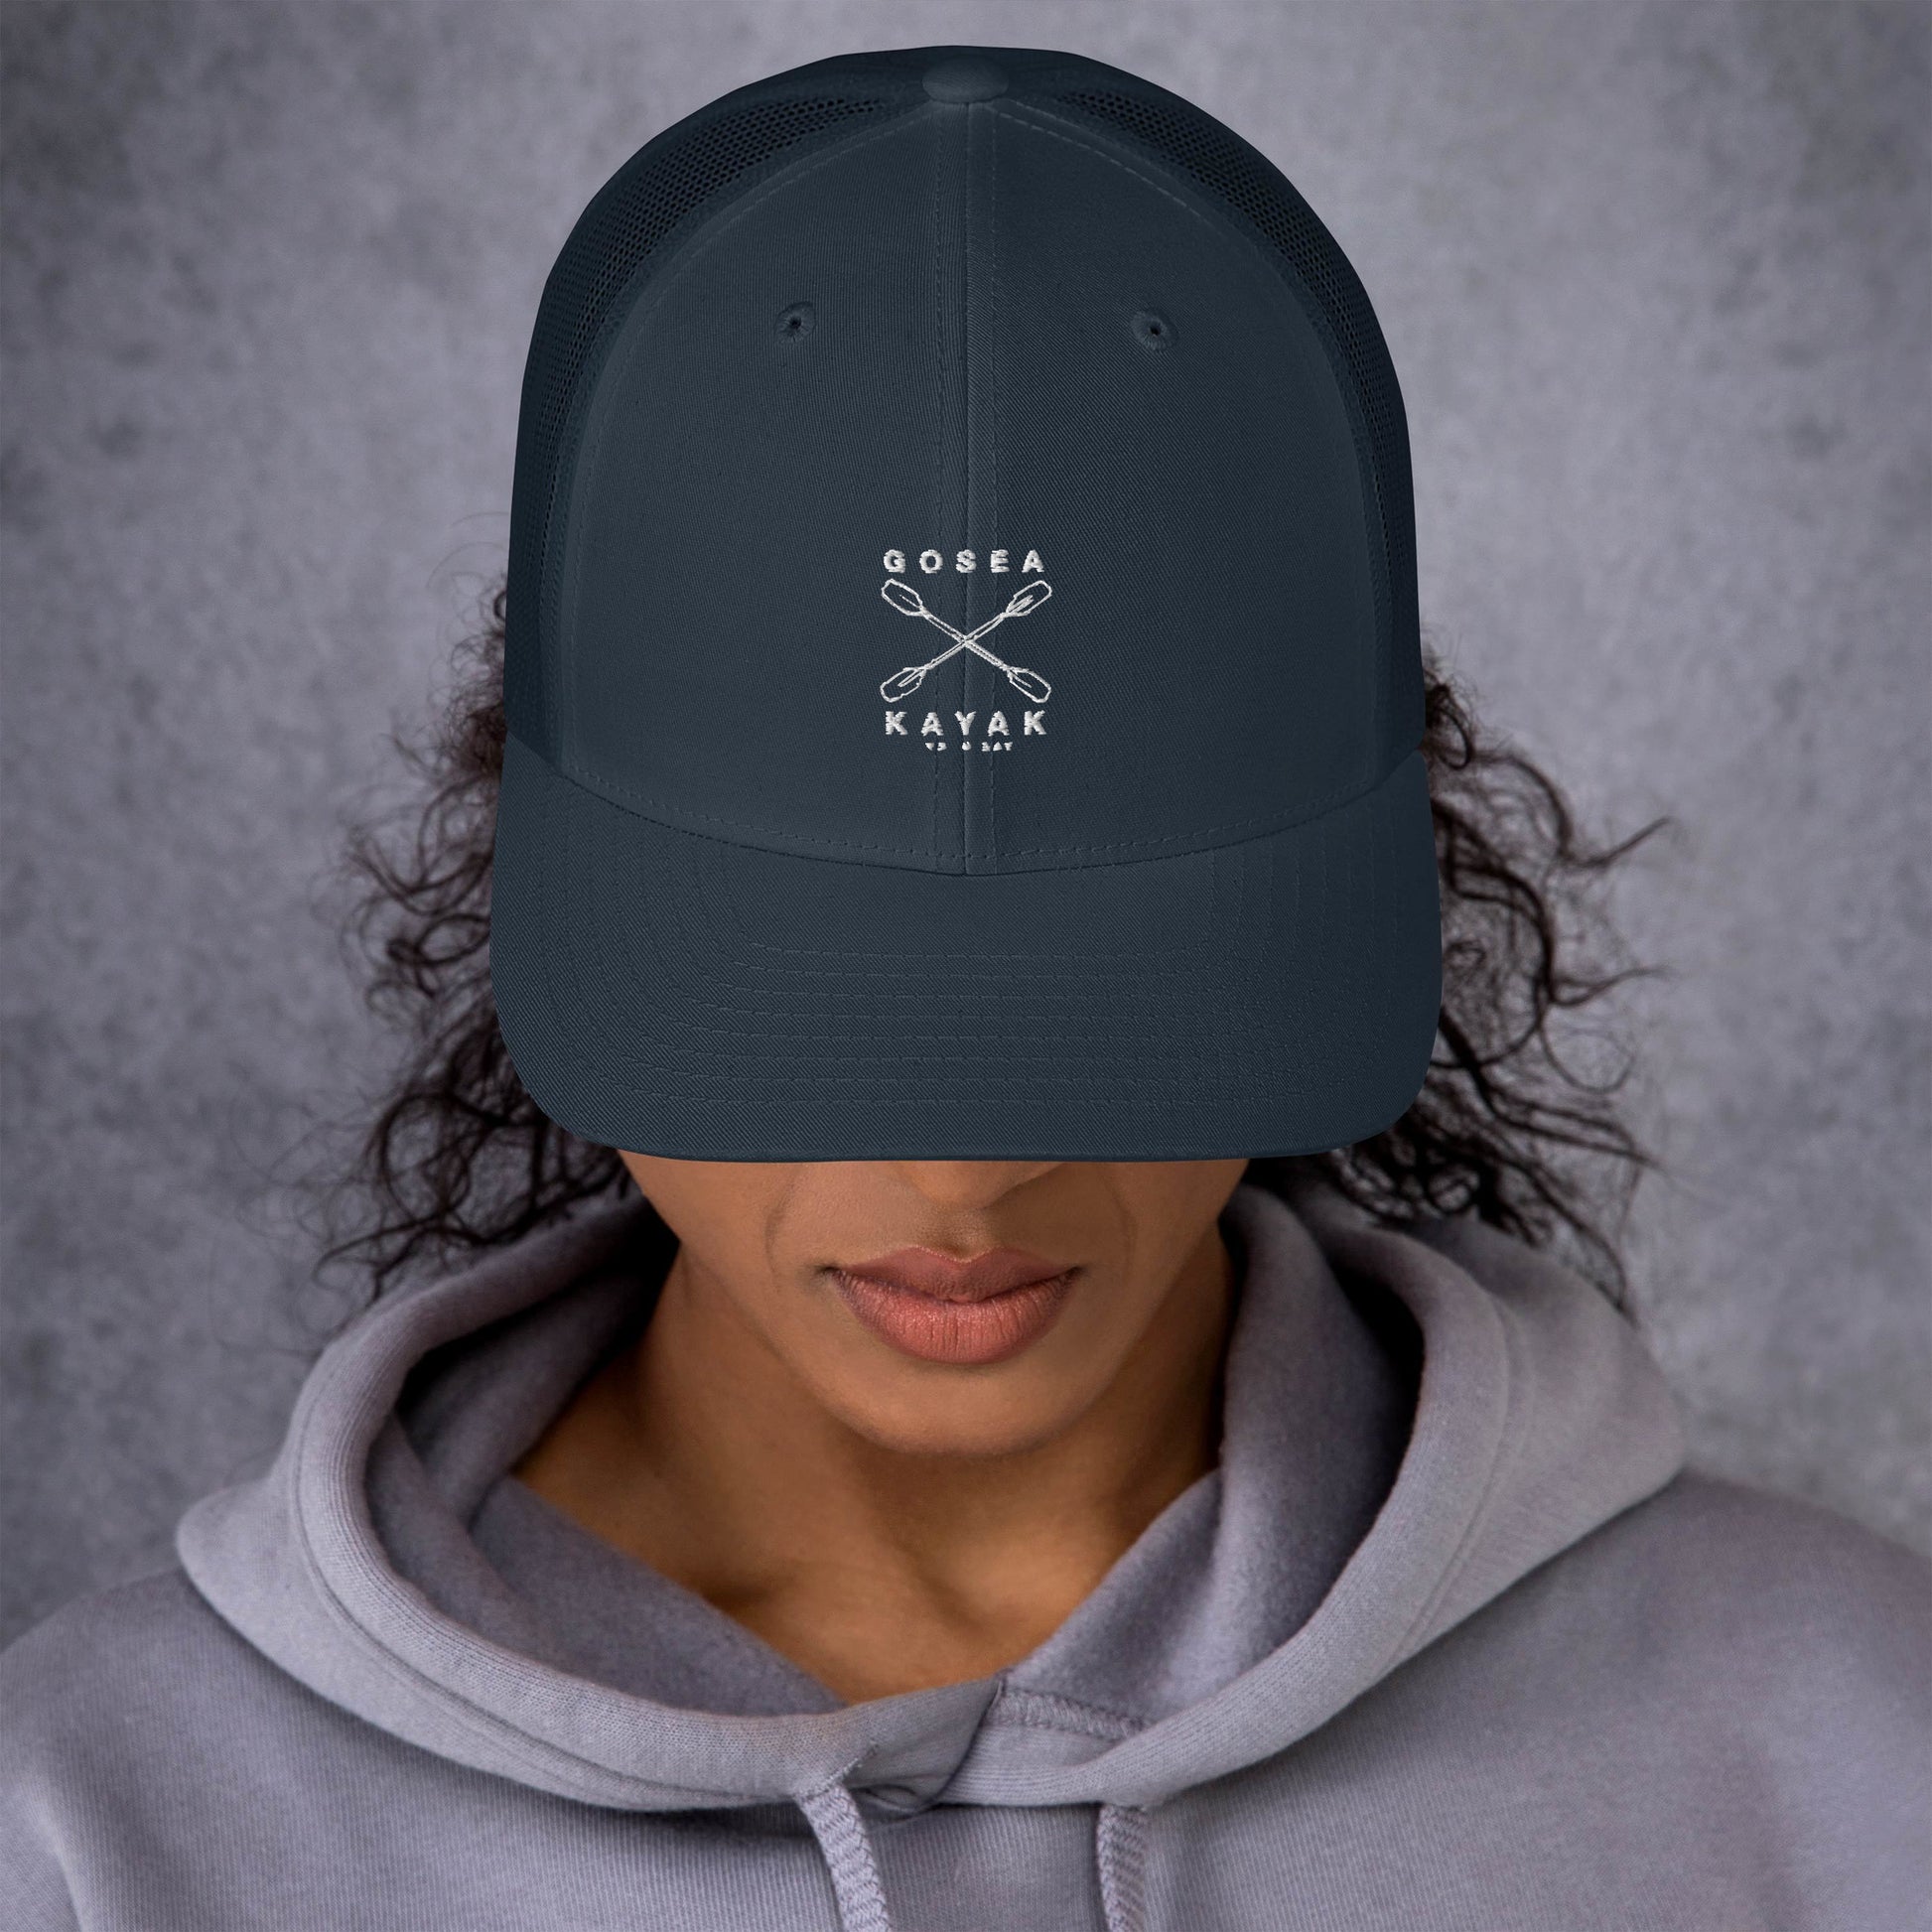  Trucker Cap - Navy - Front view - being warn by woman with her head down - Crossed Paddles Go Sea Kayak Crew logo in white on front - Genuine Byron Bay Merchandise | Produced by Go Sea Kayak Byron Bay 